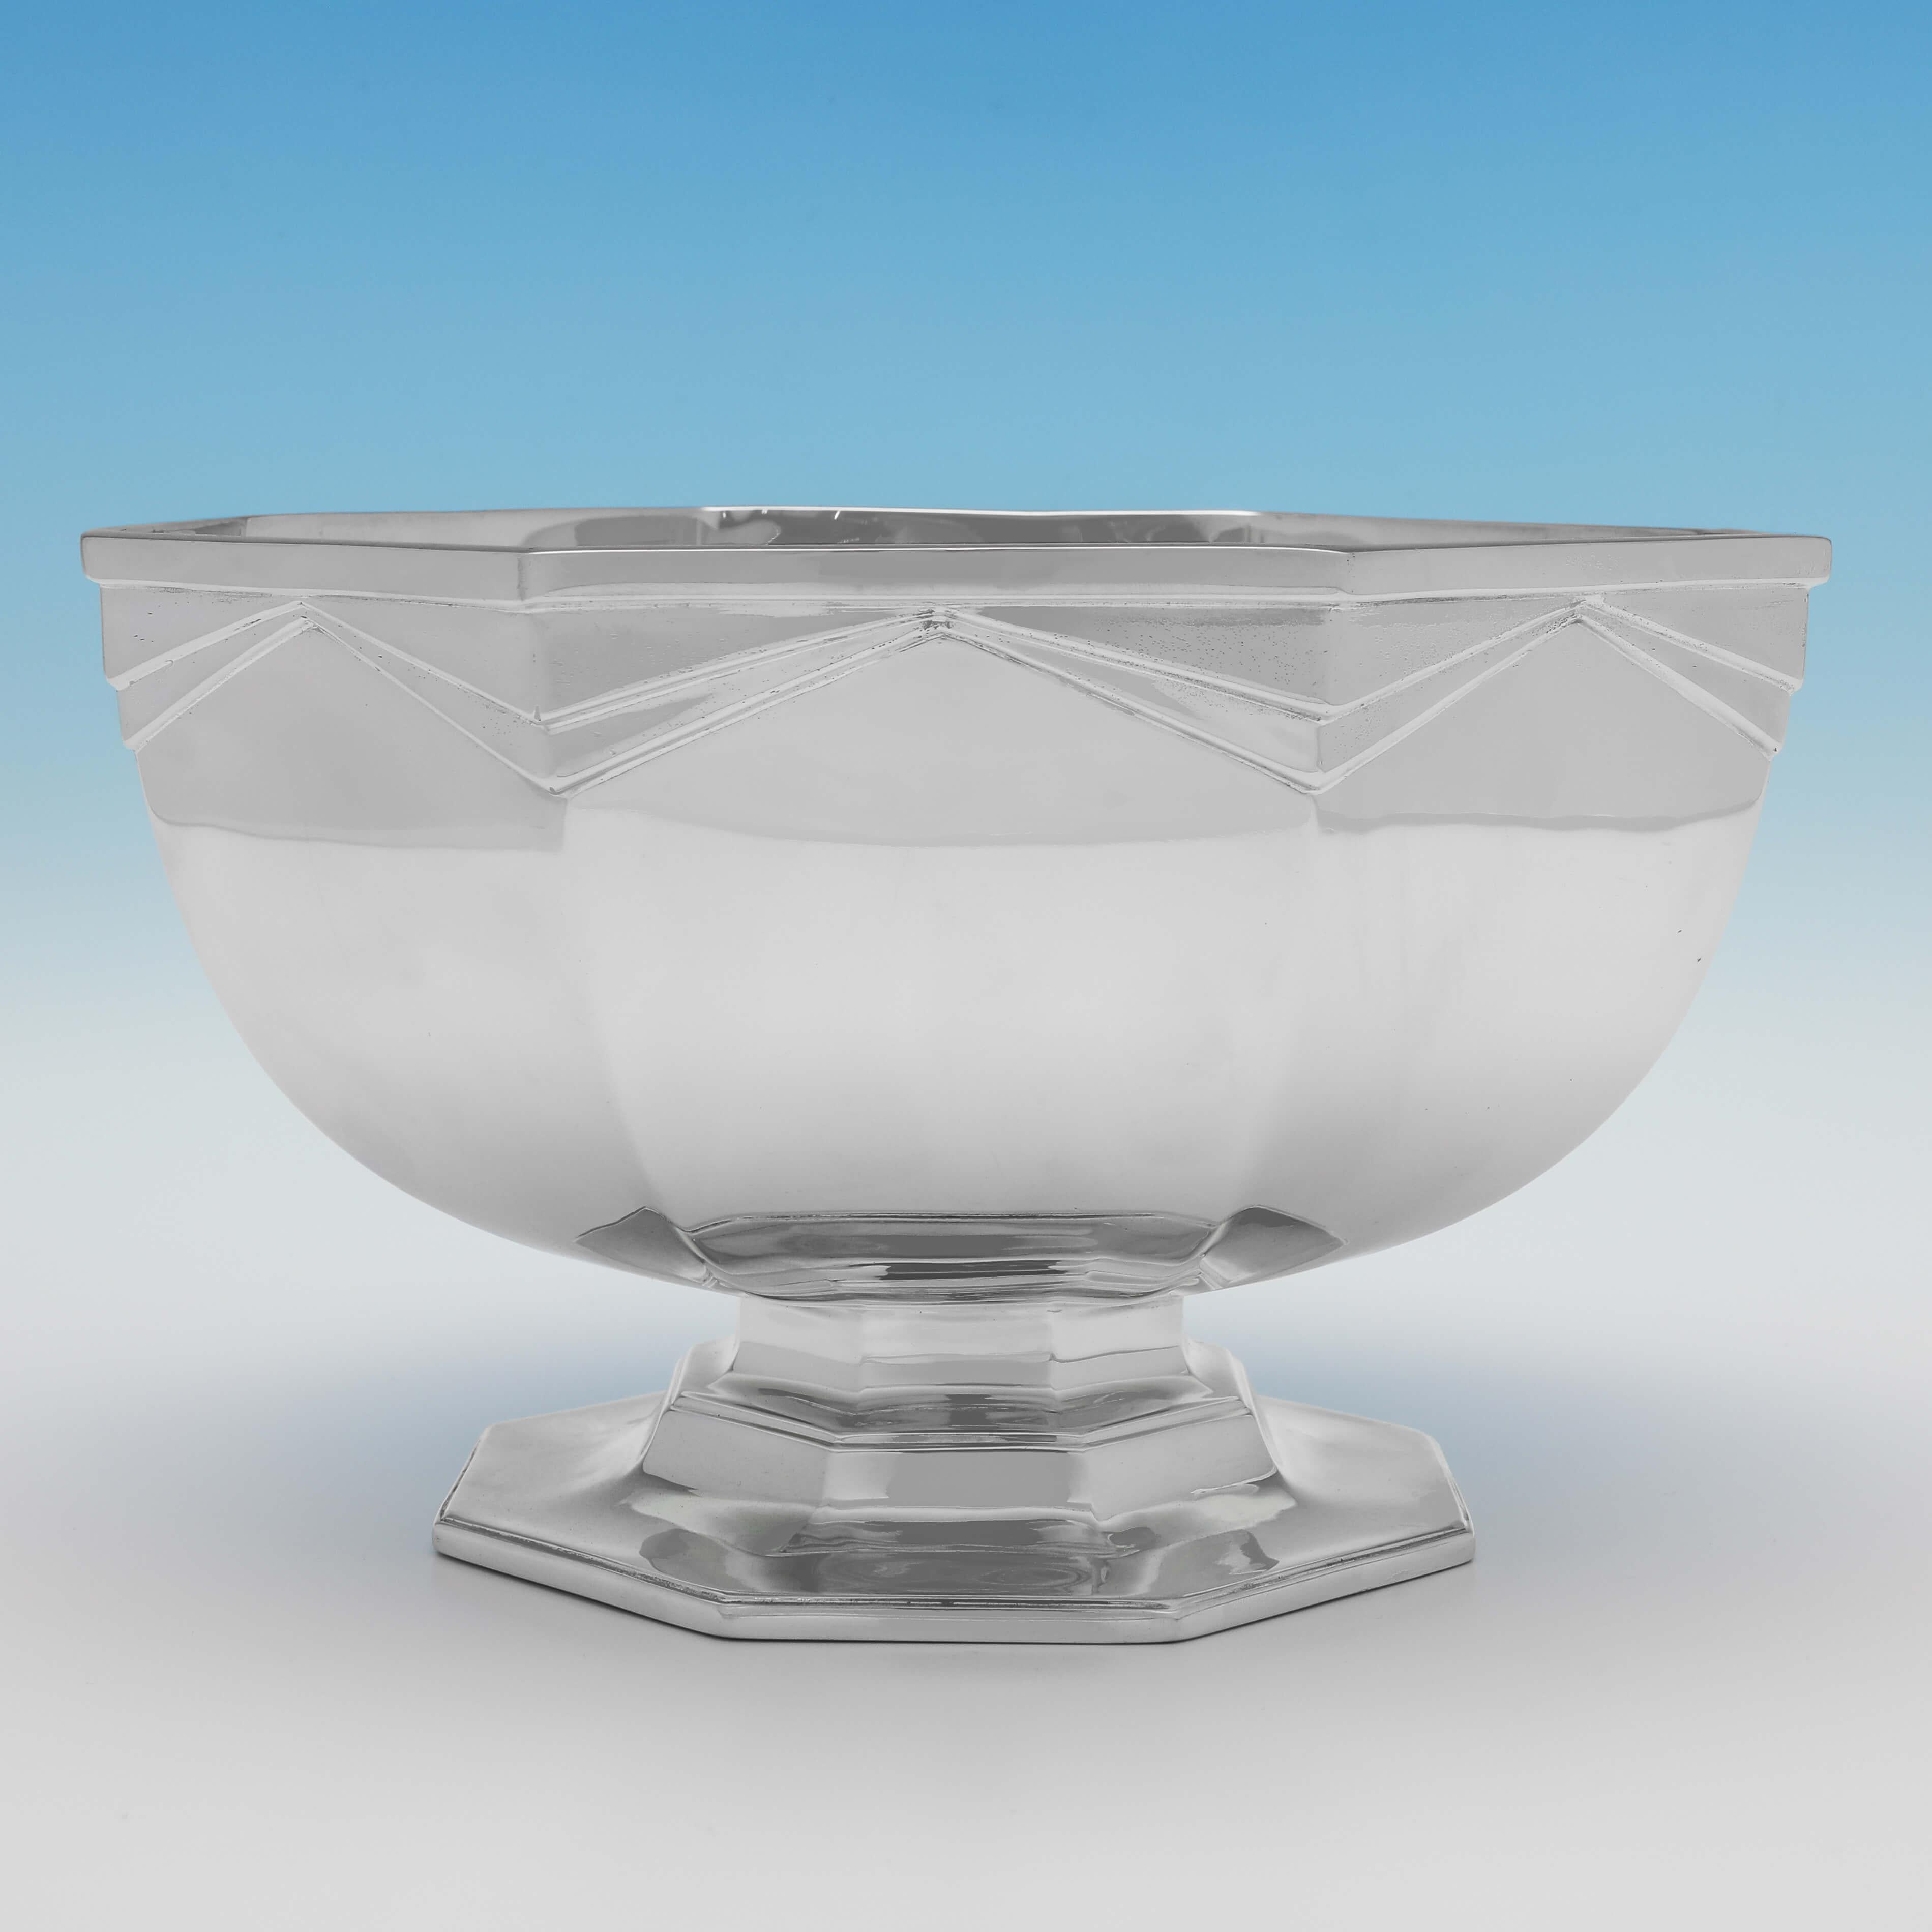 Hallmarked in London in 1932 by Goldsmiths & Silversmiths Co., this very handsome, sterling silver bowl, is octagonal in shape, and has Art Deco influenced decoration to the sides. The bowl measures 5